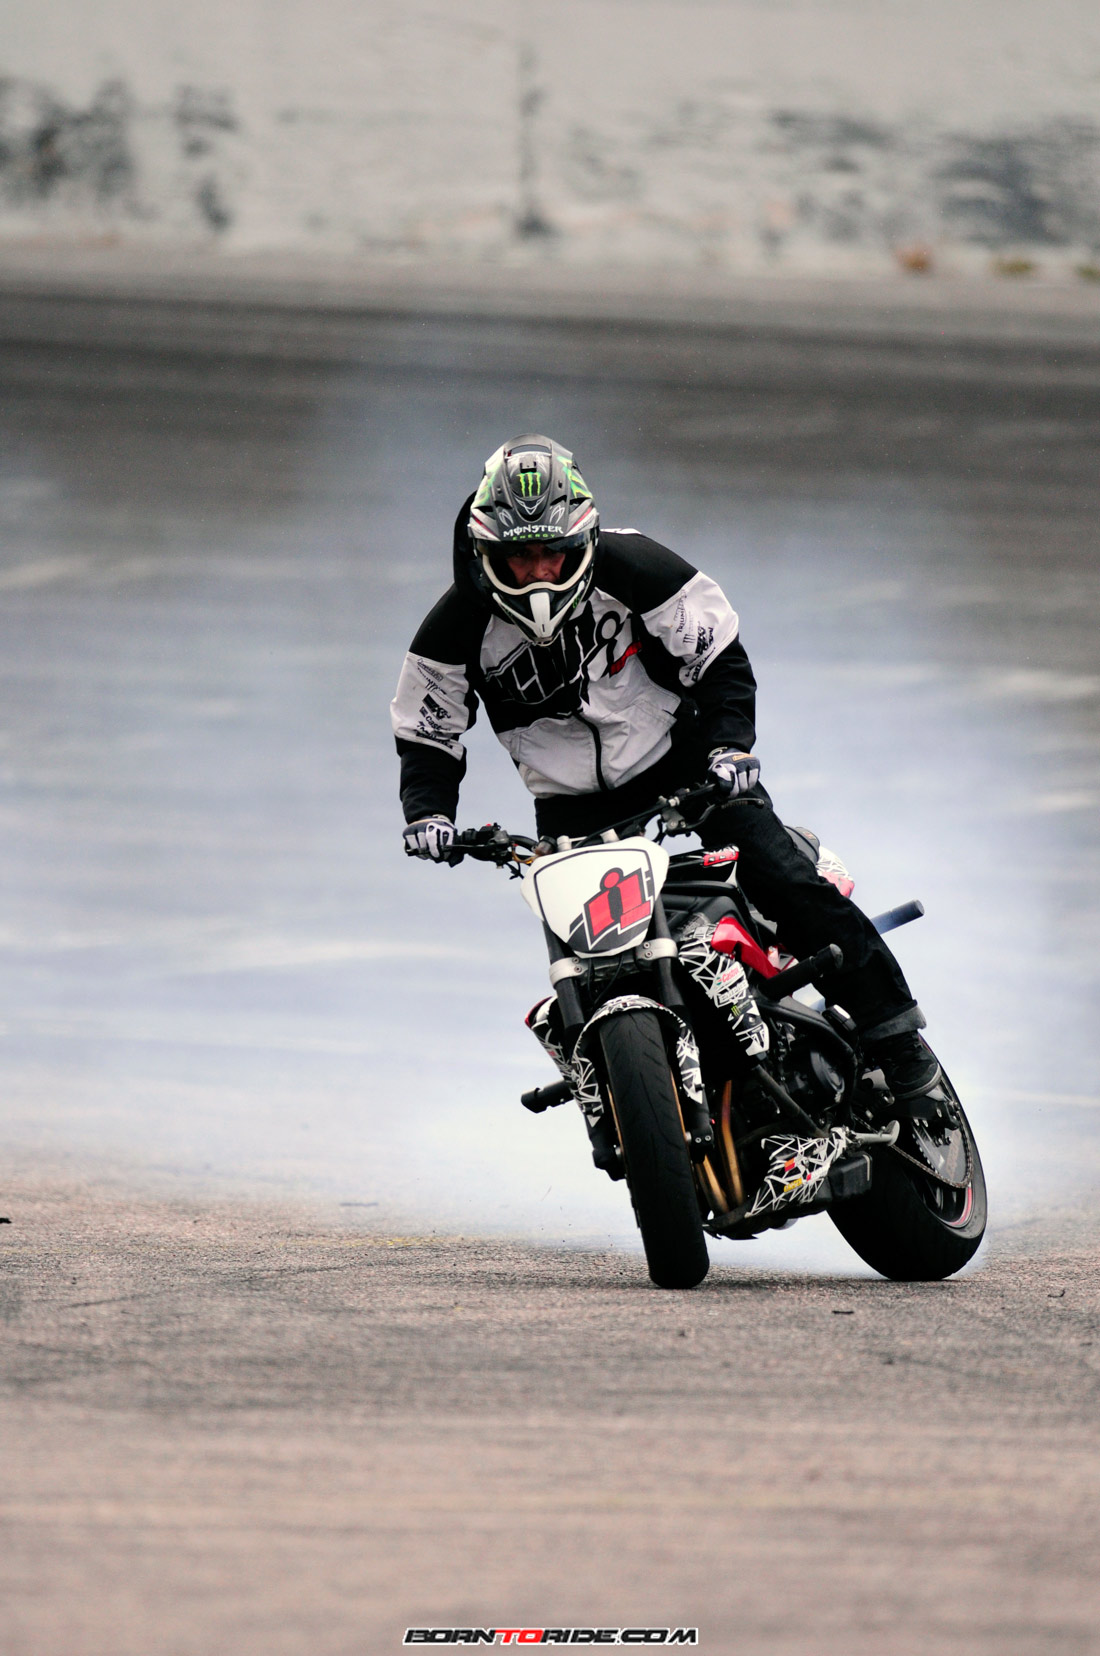 Motorcycle Stunt Riding—born To Ride 55 Born To Ride Motorcycle Magazine Motorcycle Tv 1151